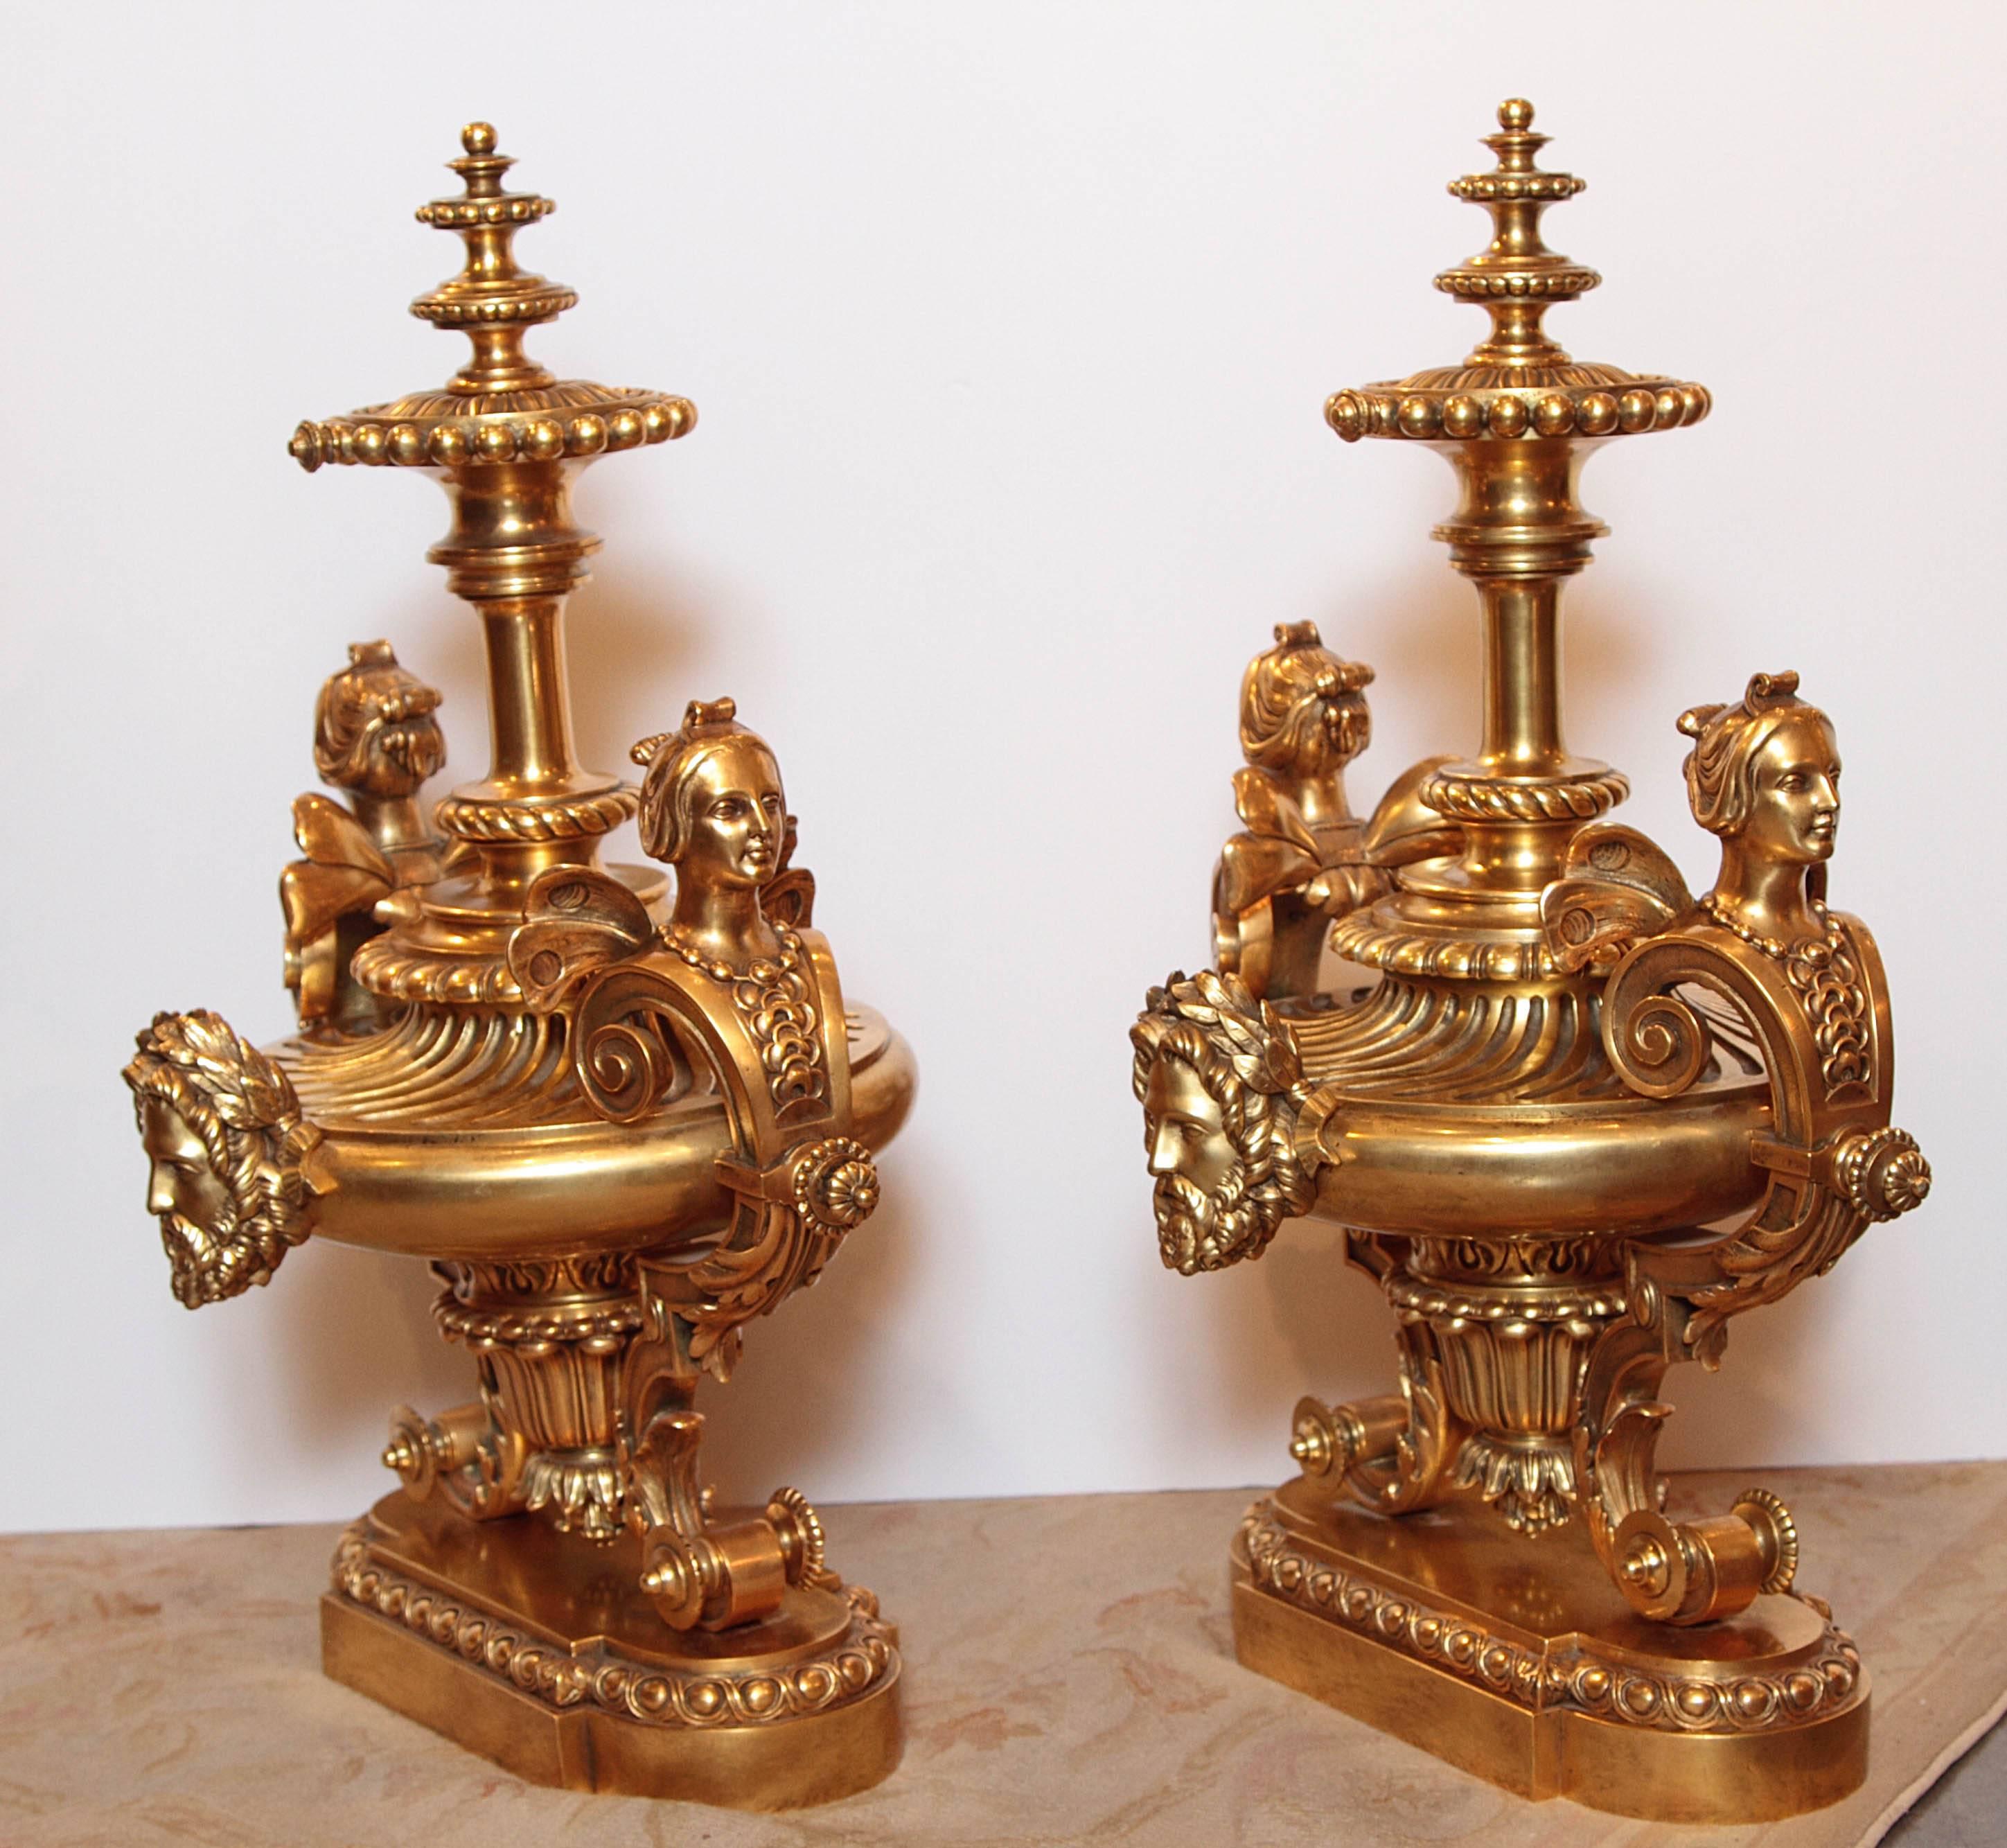 Pair of very fine 19th century French bronze doré andirons. Large and very fine detail.